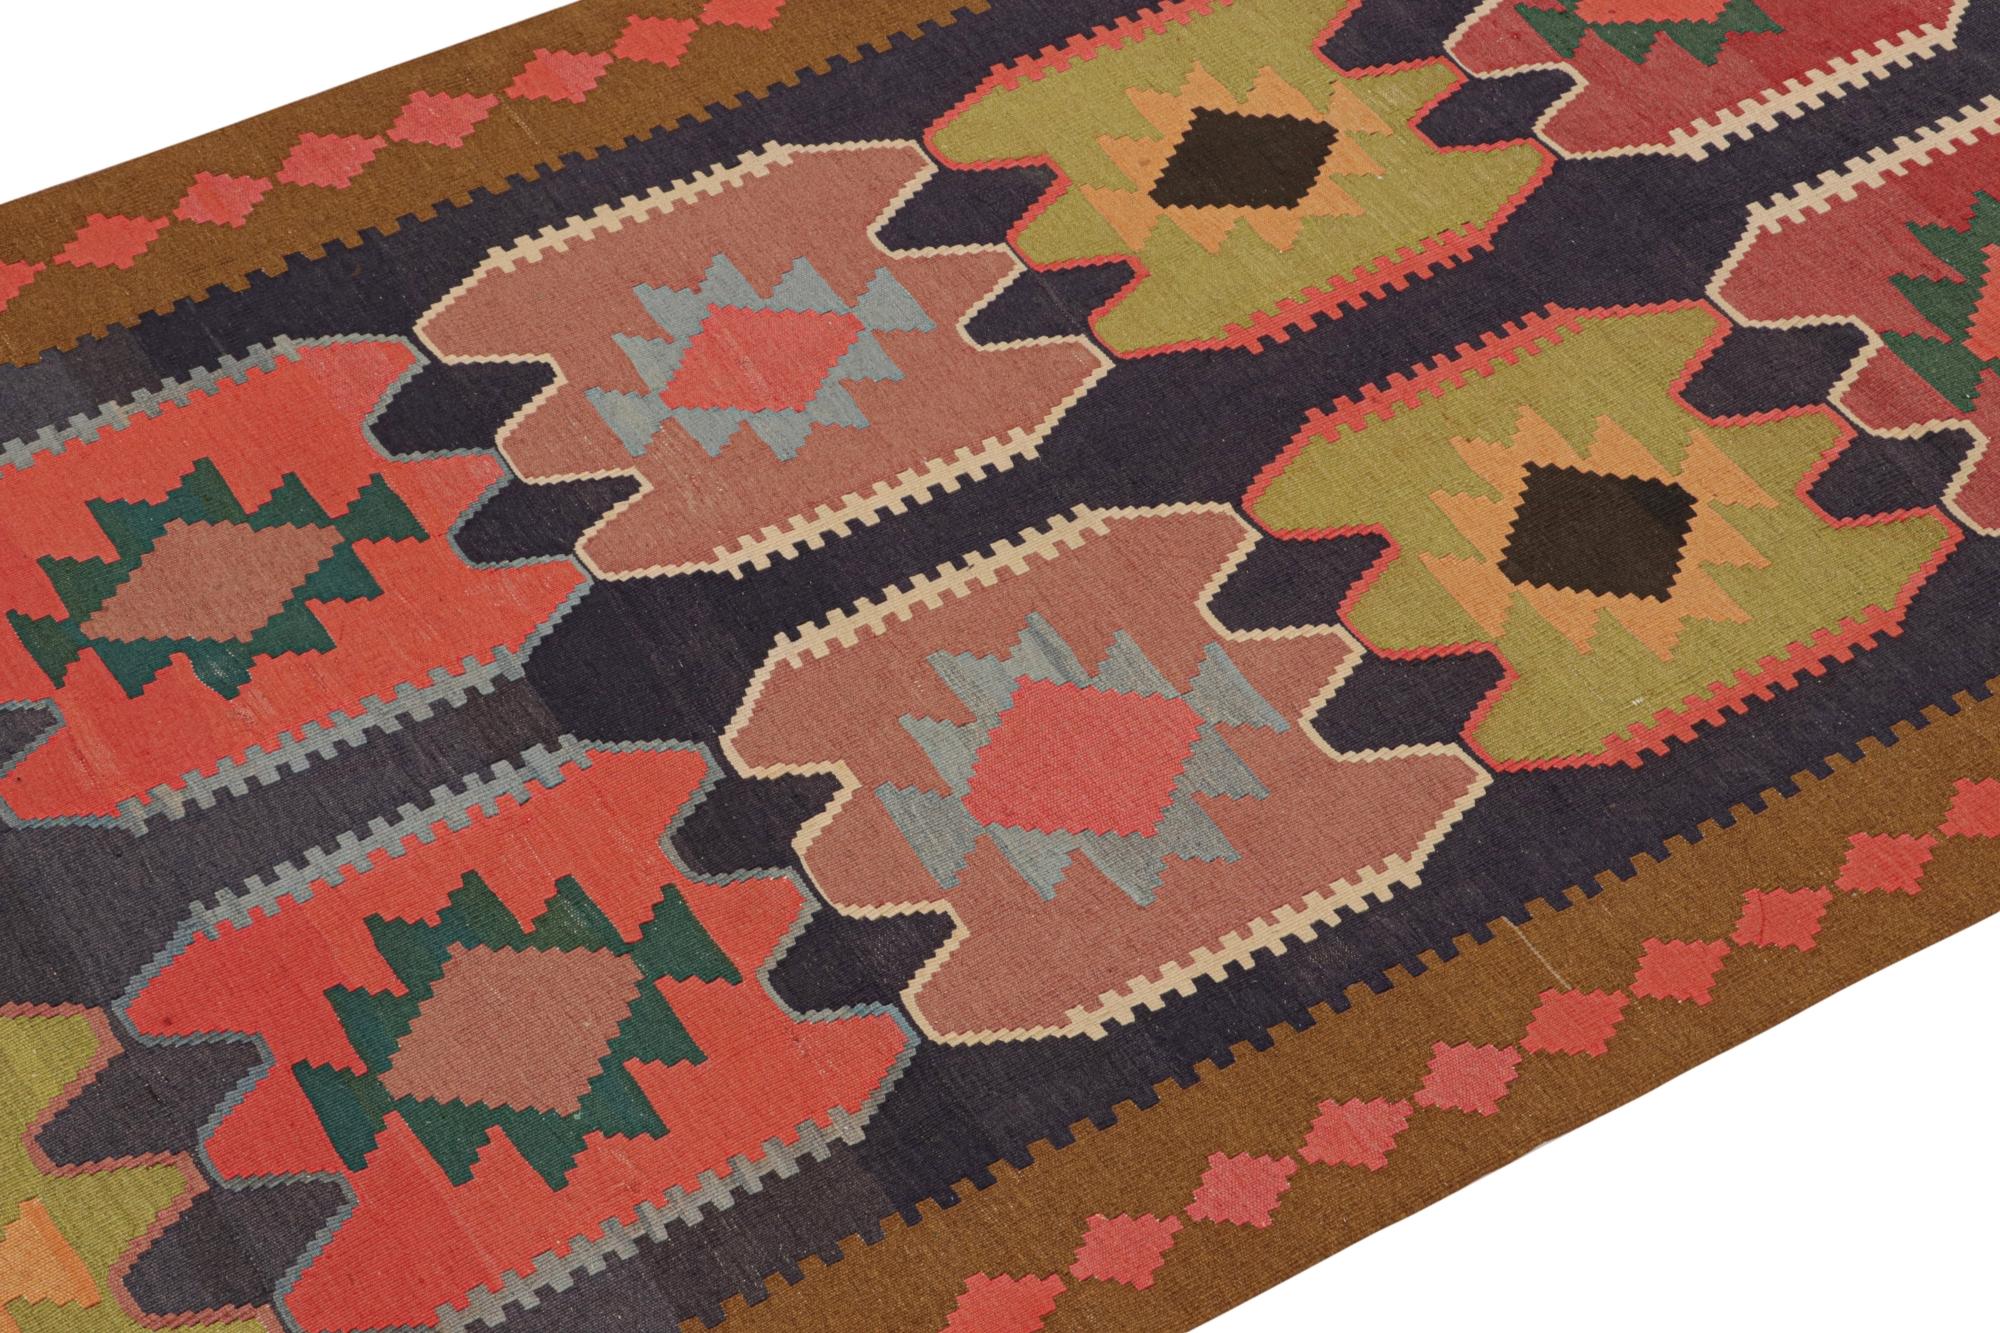 This vintage 5x9 Persian Kilim is a tribal rug from Meshkin—a small northwestern village known for its fabulous works. Handwoven in wool, it originates circa 1950-1960.

On the Design:

The design enjoys polychromatic geometric patterns on an